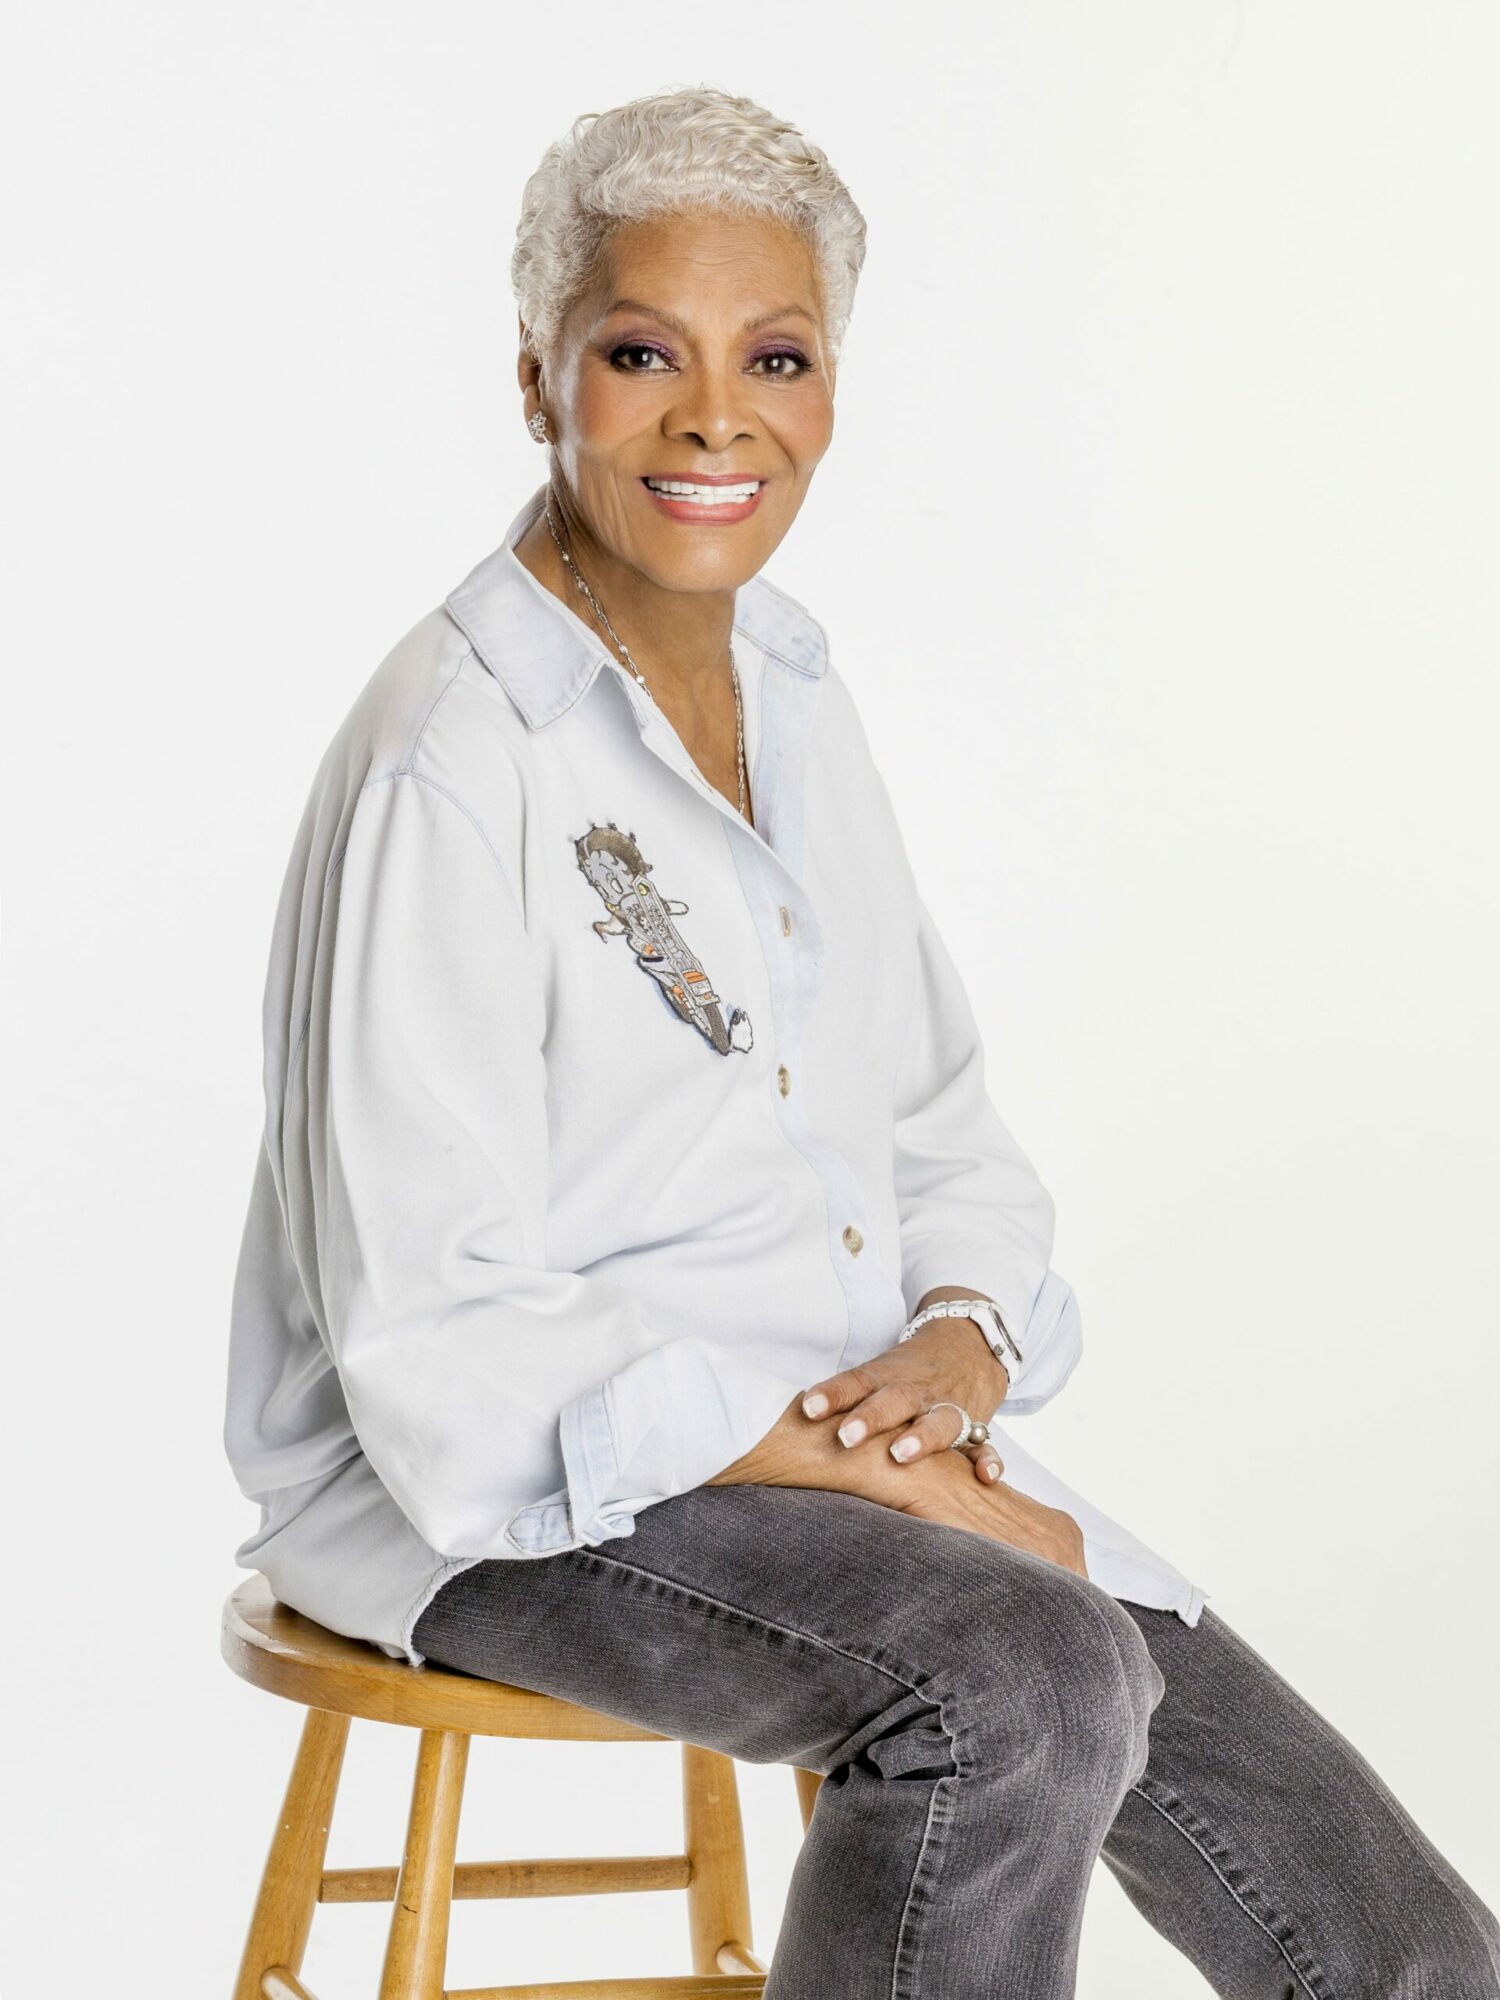 Dionne Warwick: Don’t Make Me Over at Scarborough Spa Grand Hall, Scarborough